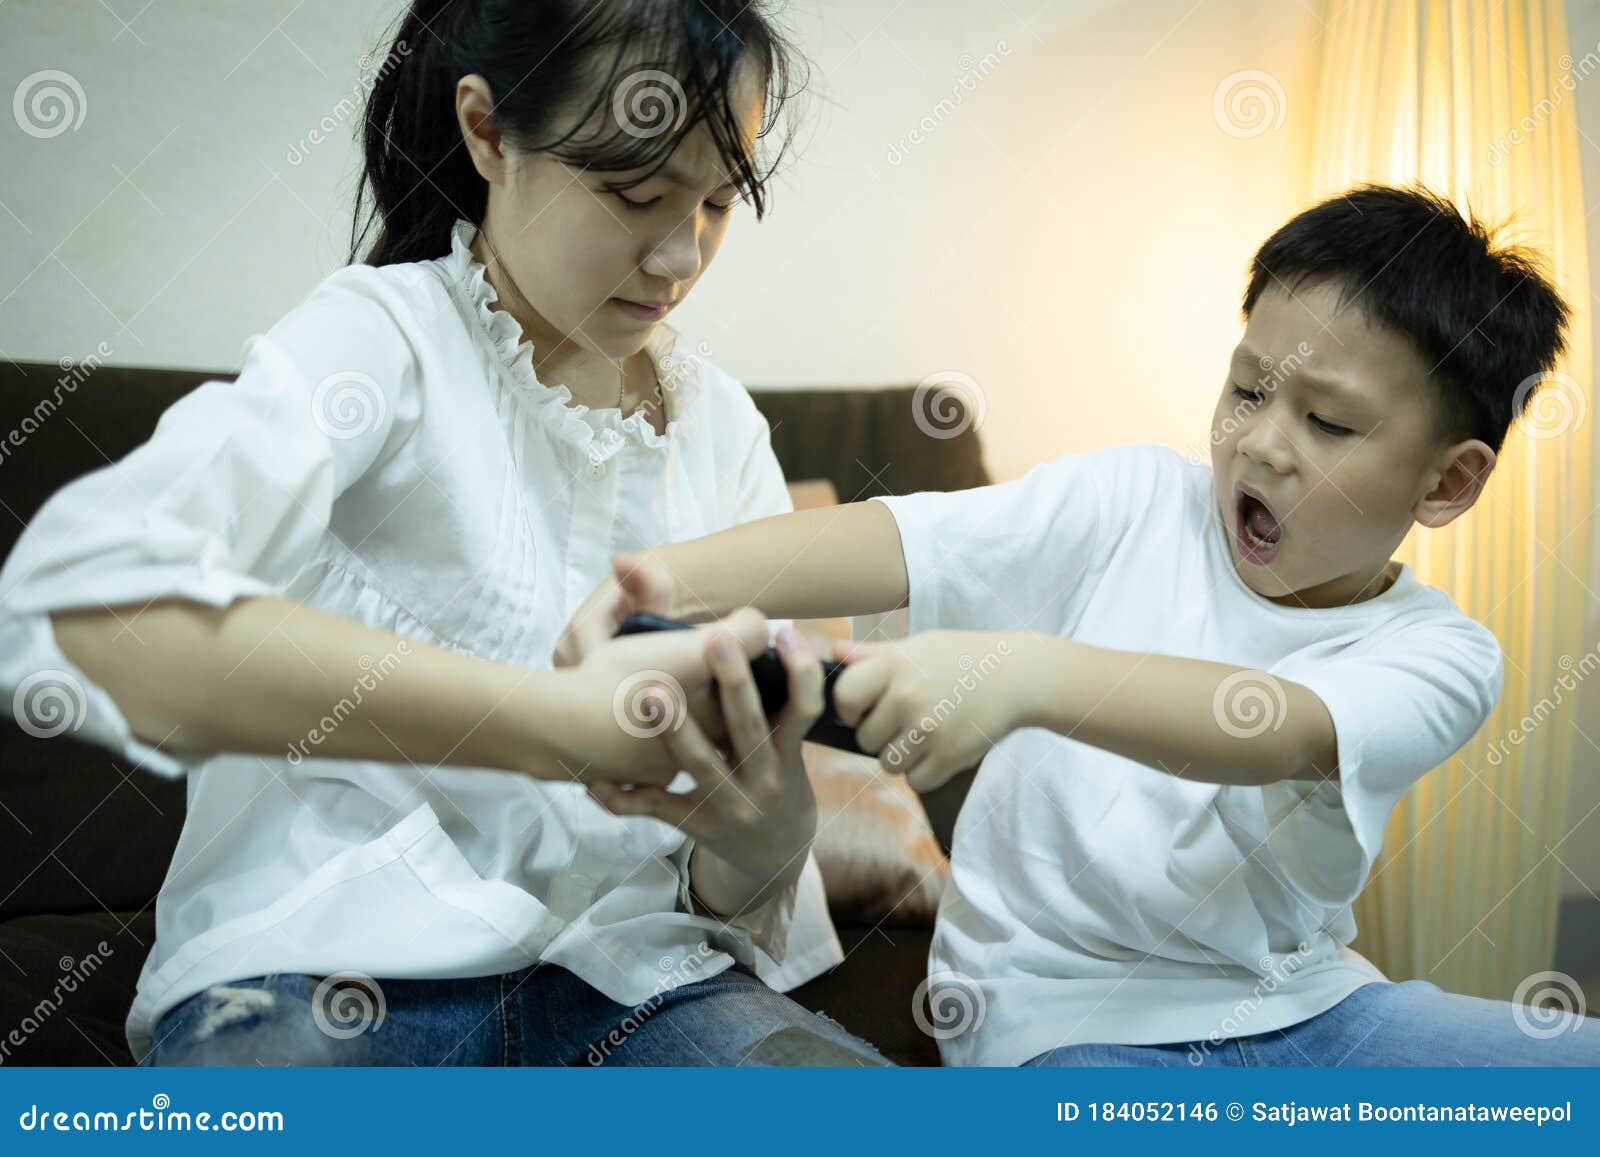 two kids boy and child girl fighting for smartphone,sibling pulling mobile phone one another,shout and quarrel,children arguing